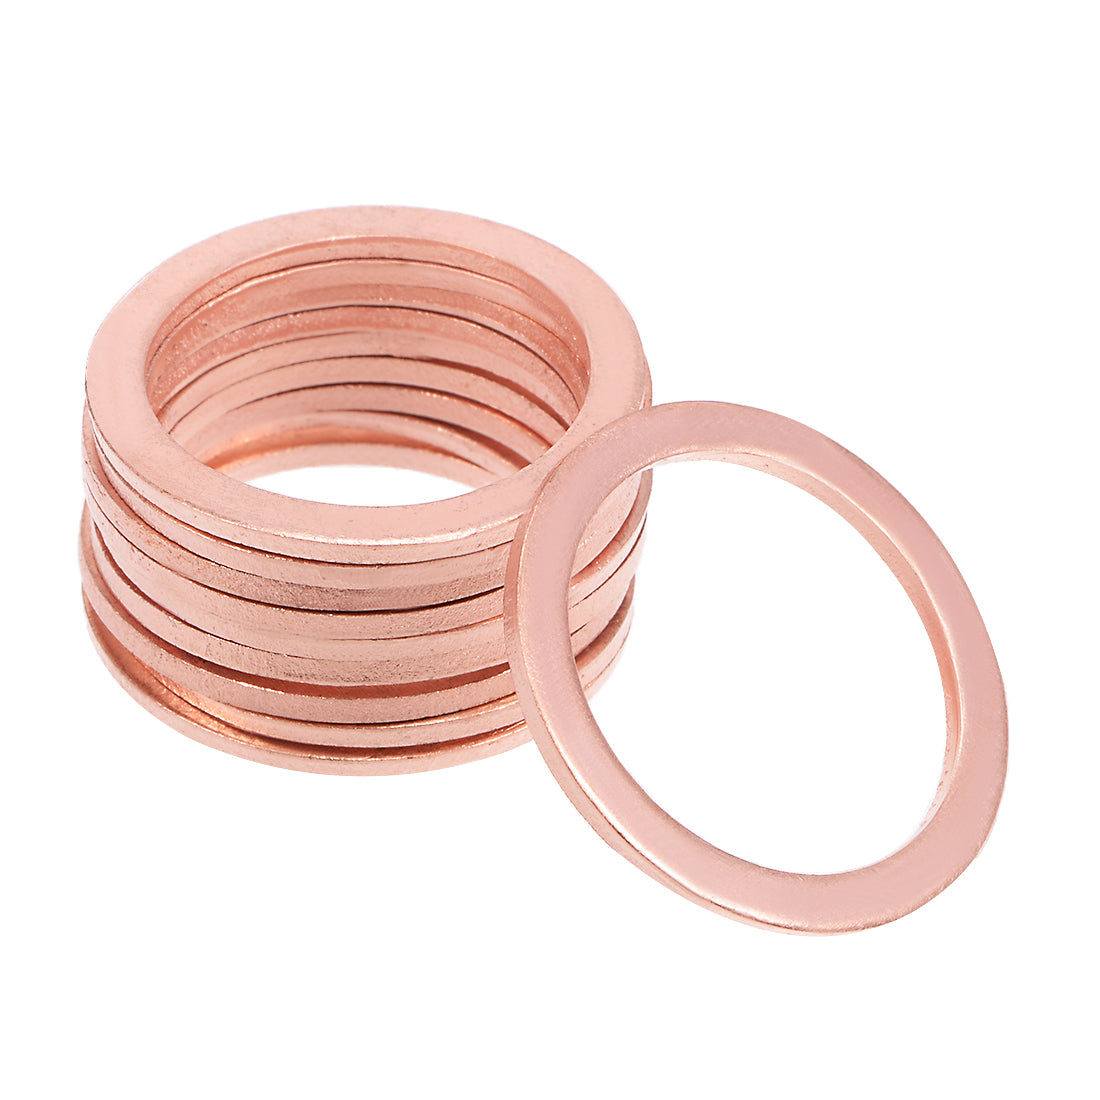 uxcell Uxcell 10Pcs 33mm x 42.5mm x 2mm Copper Flat Washer for Screw Bolt